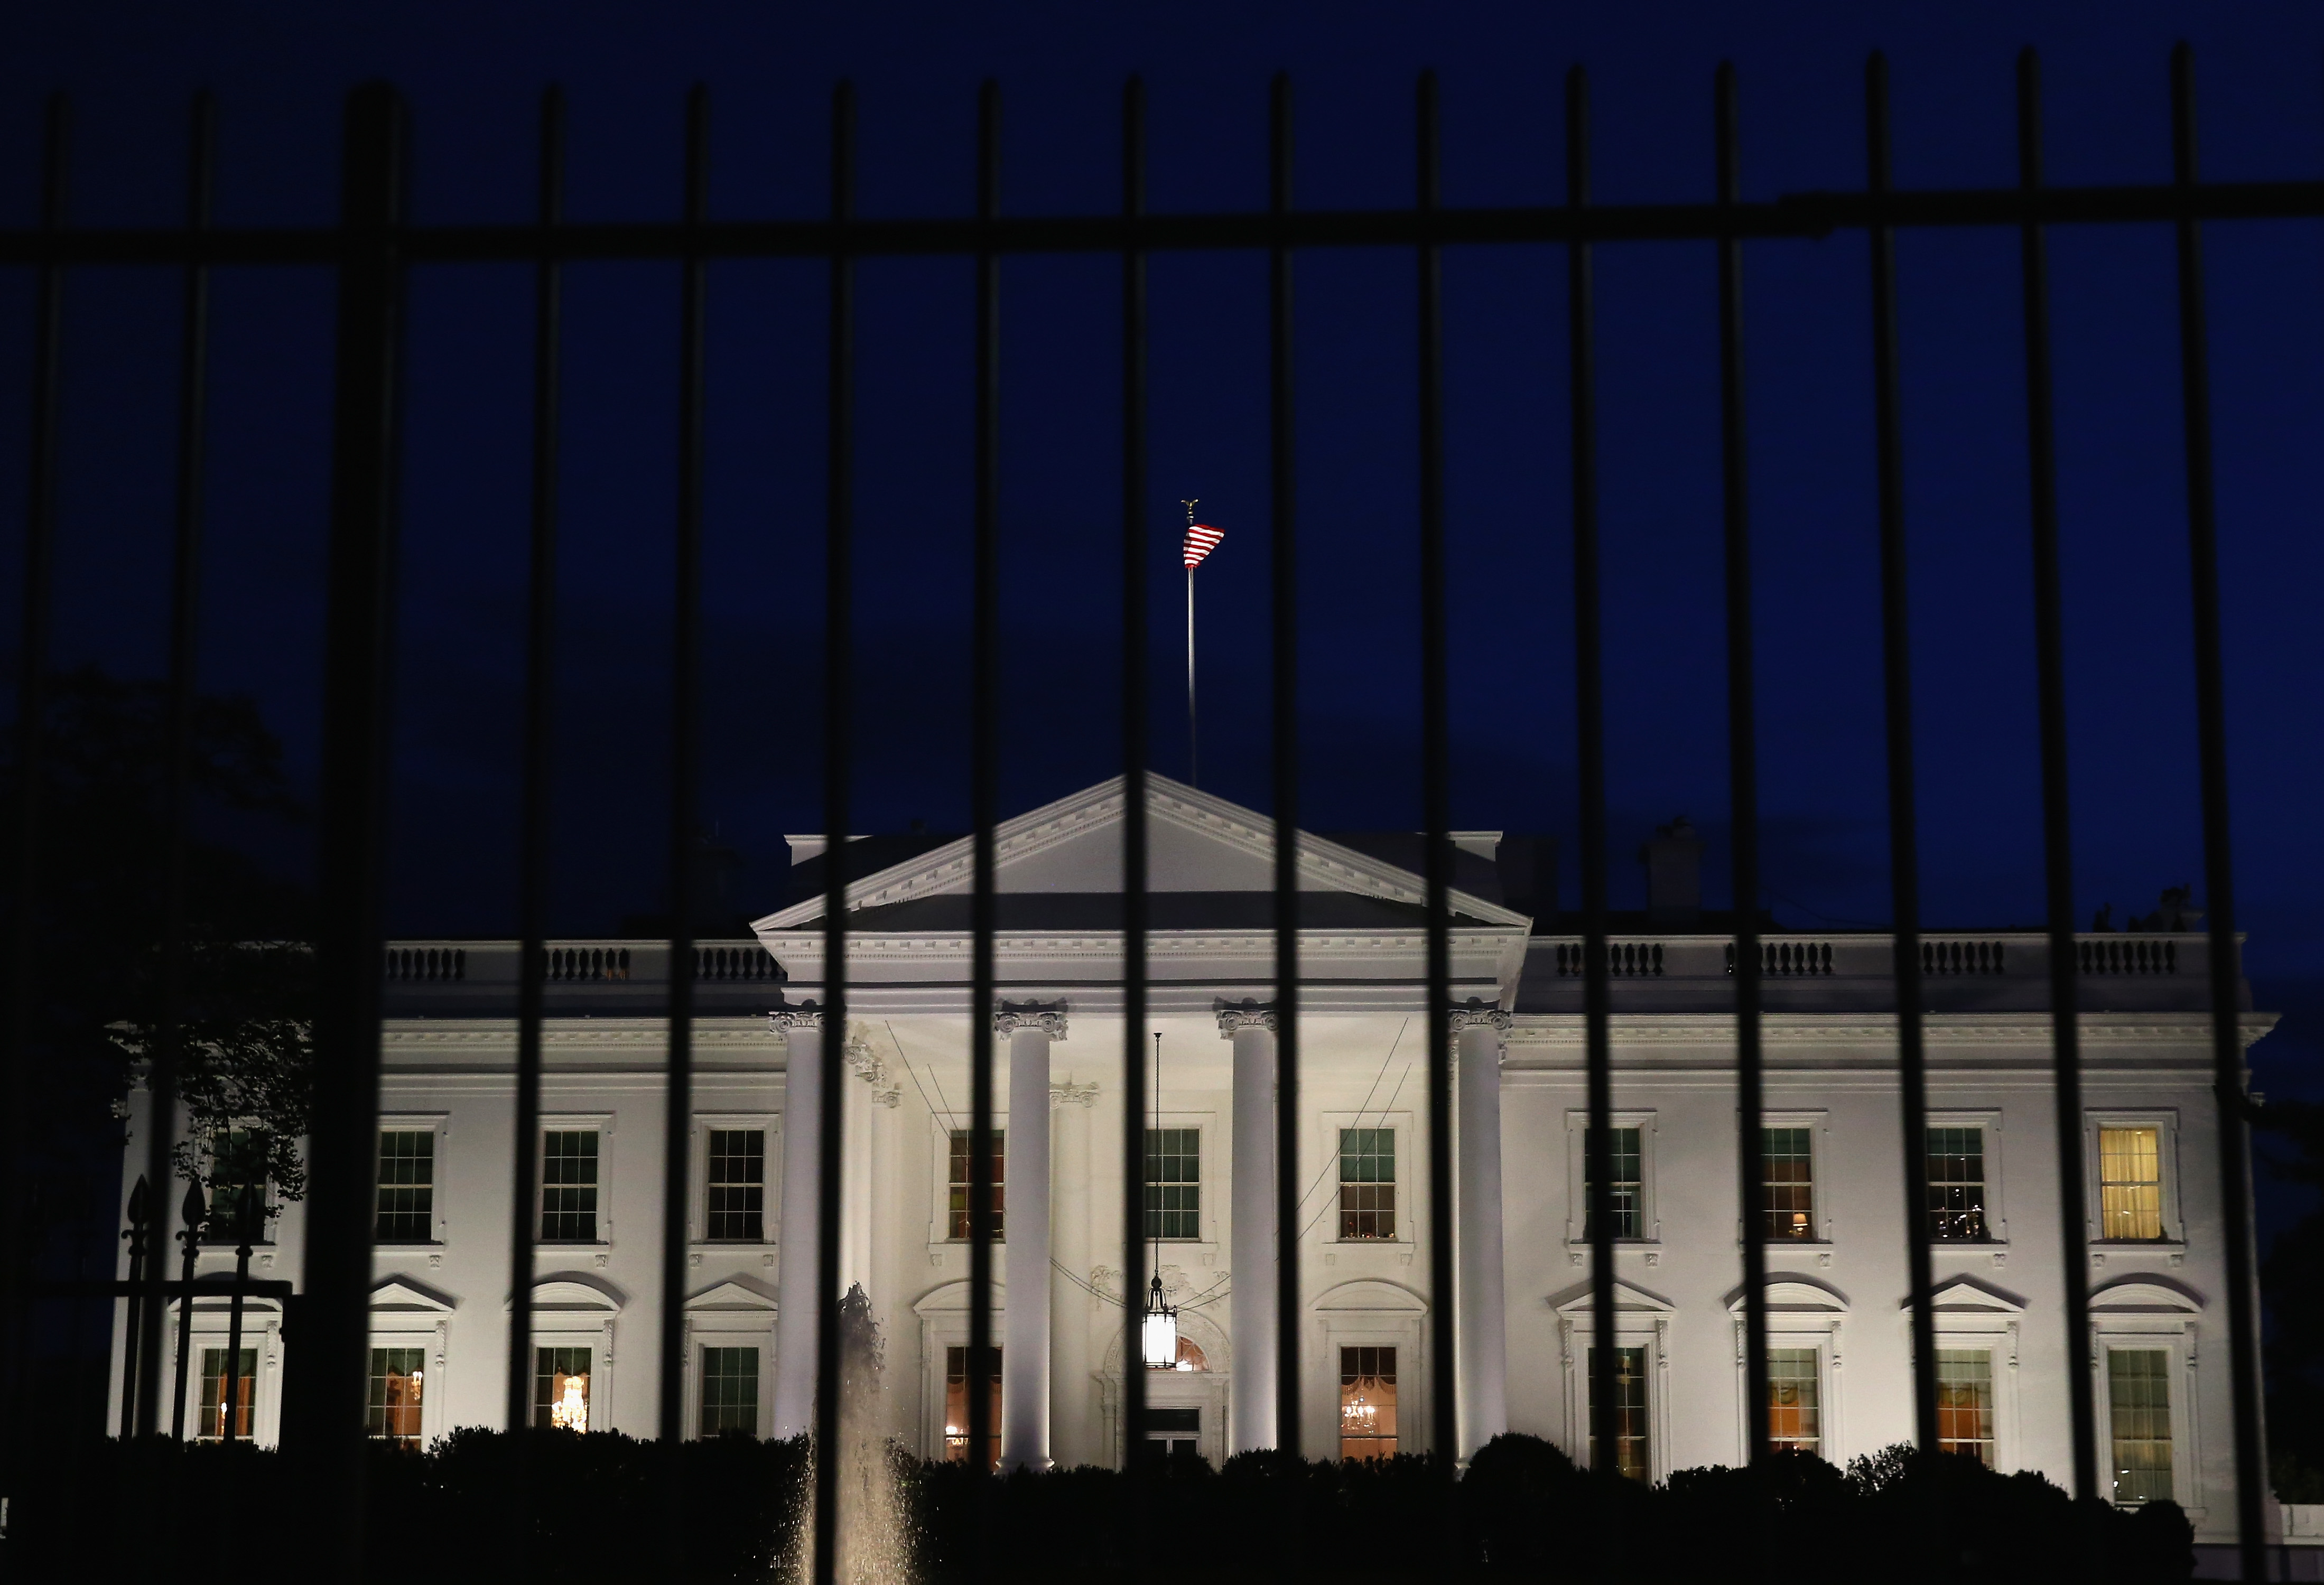 A tall security fence stands in front of the White House on Nov. 4, 2014 in Washington.